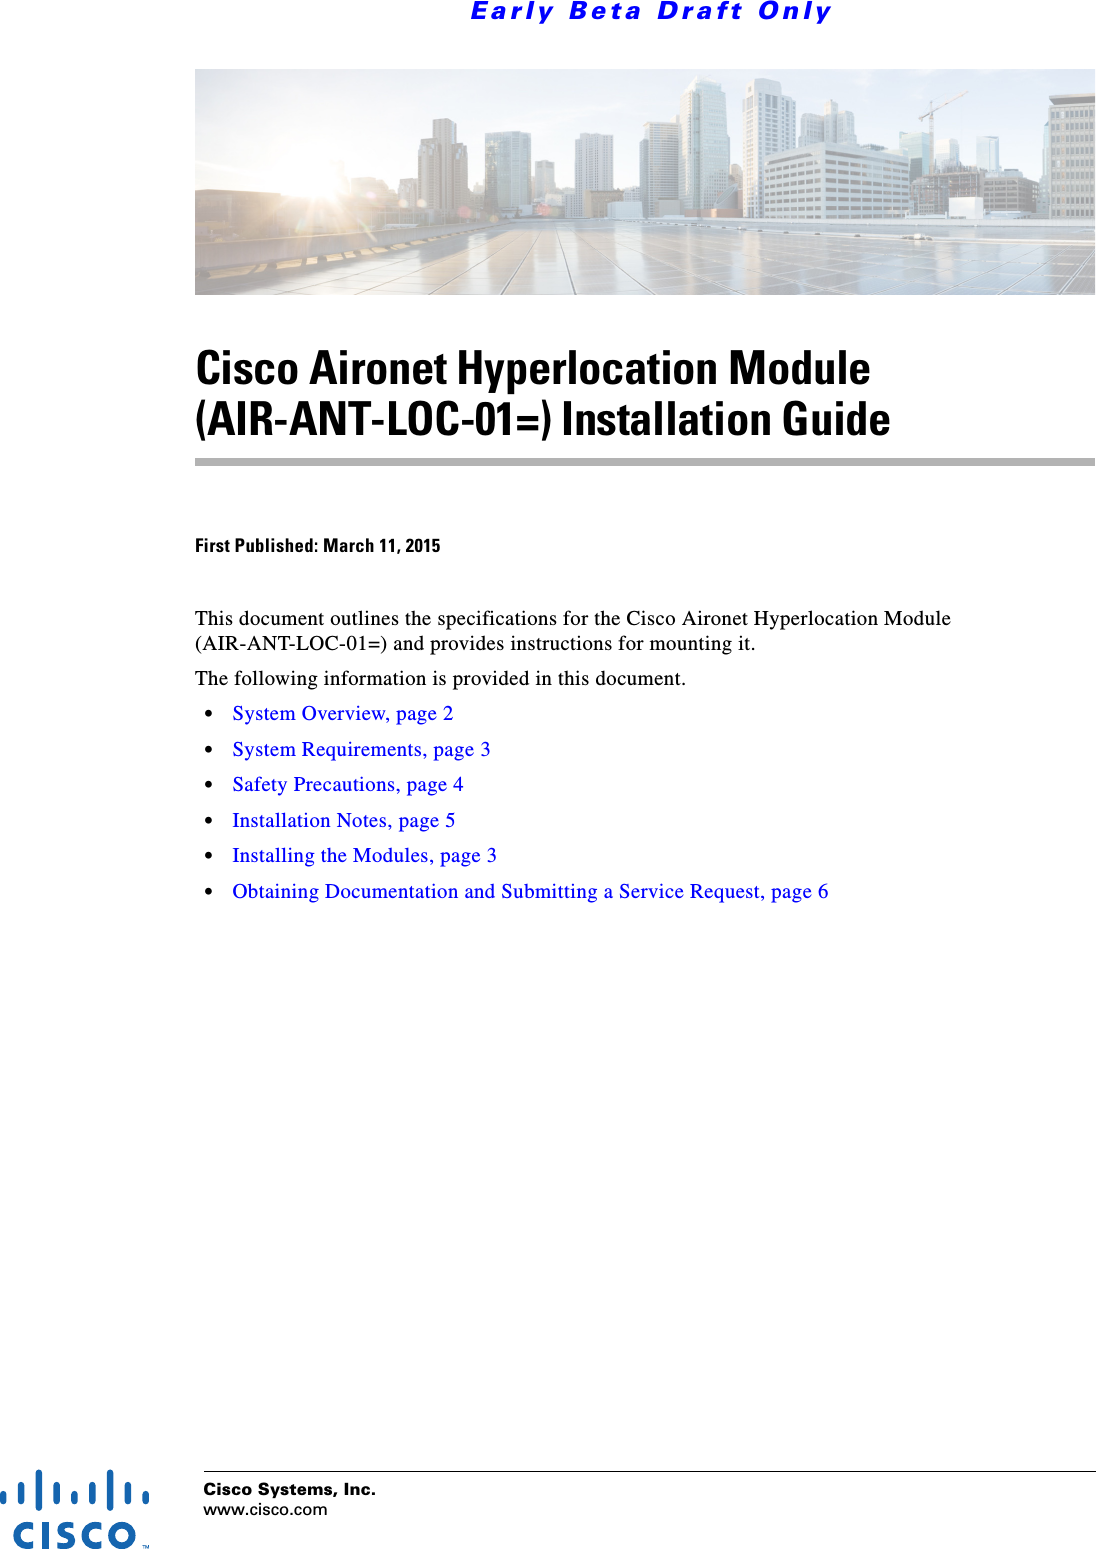 Cisco Systems, Inc.www.cisco.com Early Beta Draft OnlyCisco Aironet Hyperlocation Module (AIR-ANT-LOC-01=) Installation GuideFirst Published: March 11, 2015This document outlines the specifications for the Cisco Aironet Hyperlocation Module (AIR-ANT-LOC-01=) and provides instructions for mounting it. The following information is provided in this document.  • System Overview, page 2  • System Requirements, page 3  • Safety Precautions, page 4  • Installation Notes, page 5  • Installing the Modules, page 3  • Obtaining Documentation and Submitting a Service Request, page 6